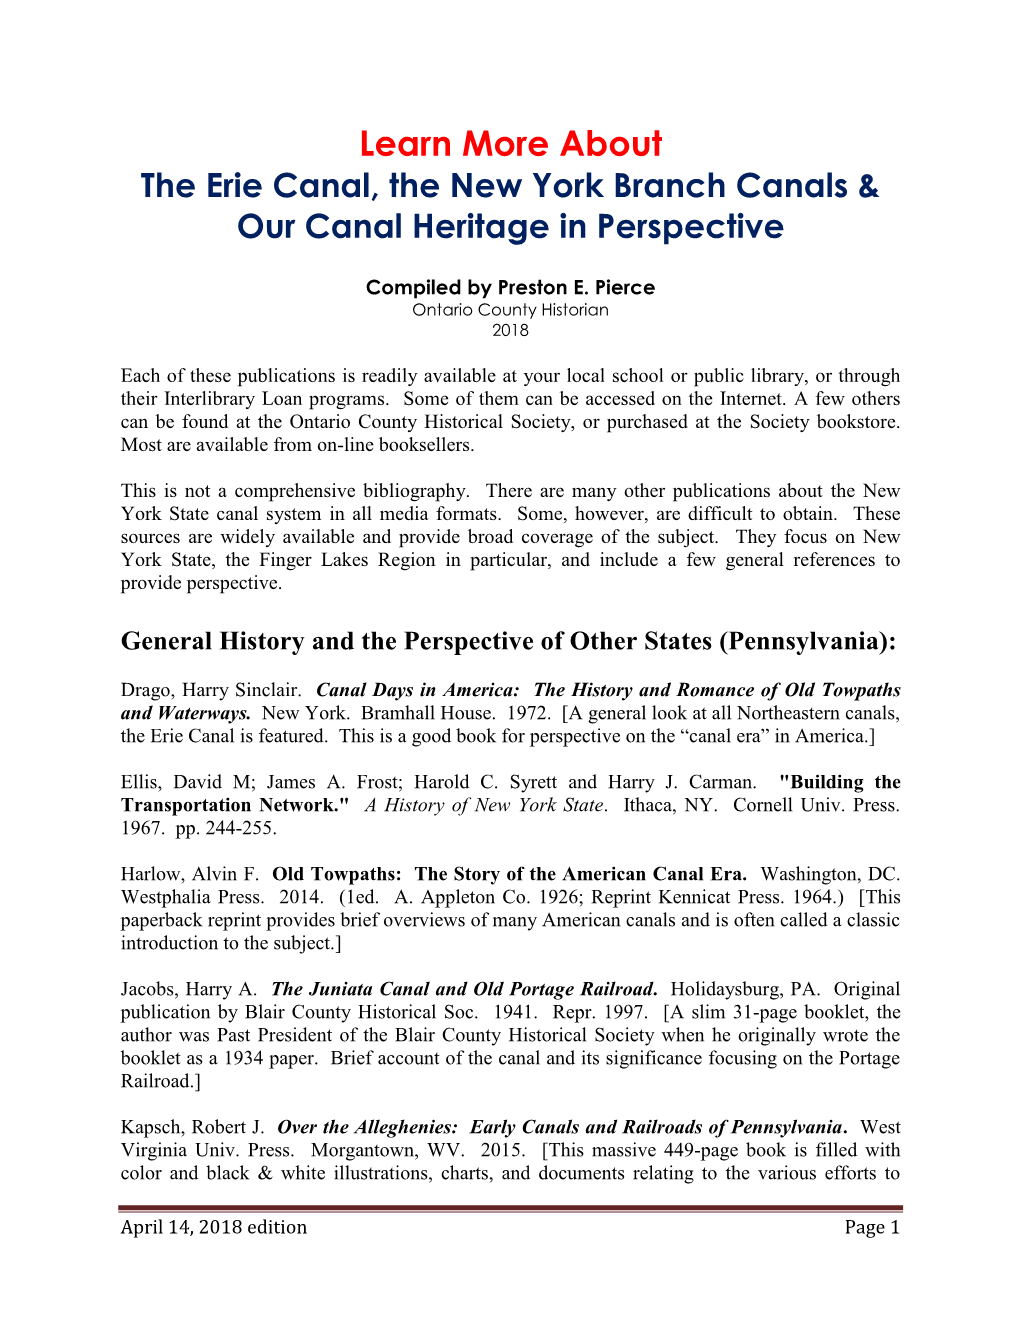 Learn More About: the Erie Canal, the New York Branch